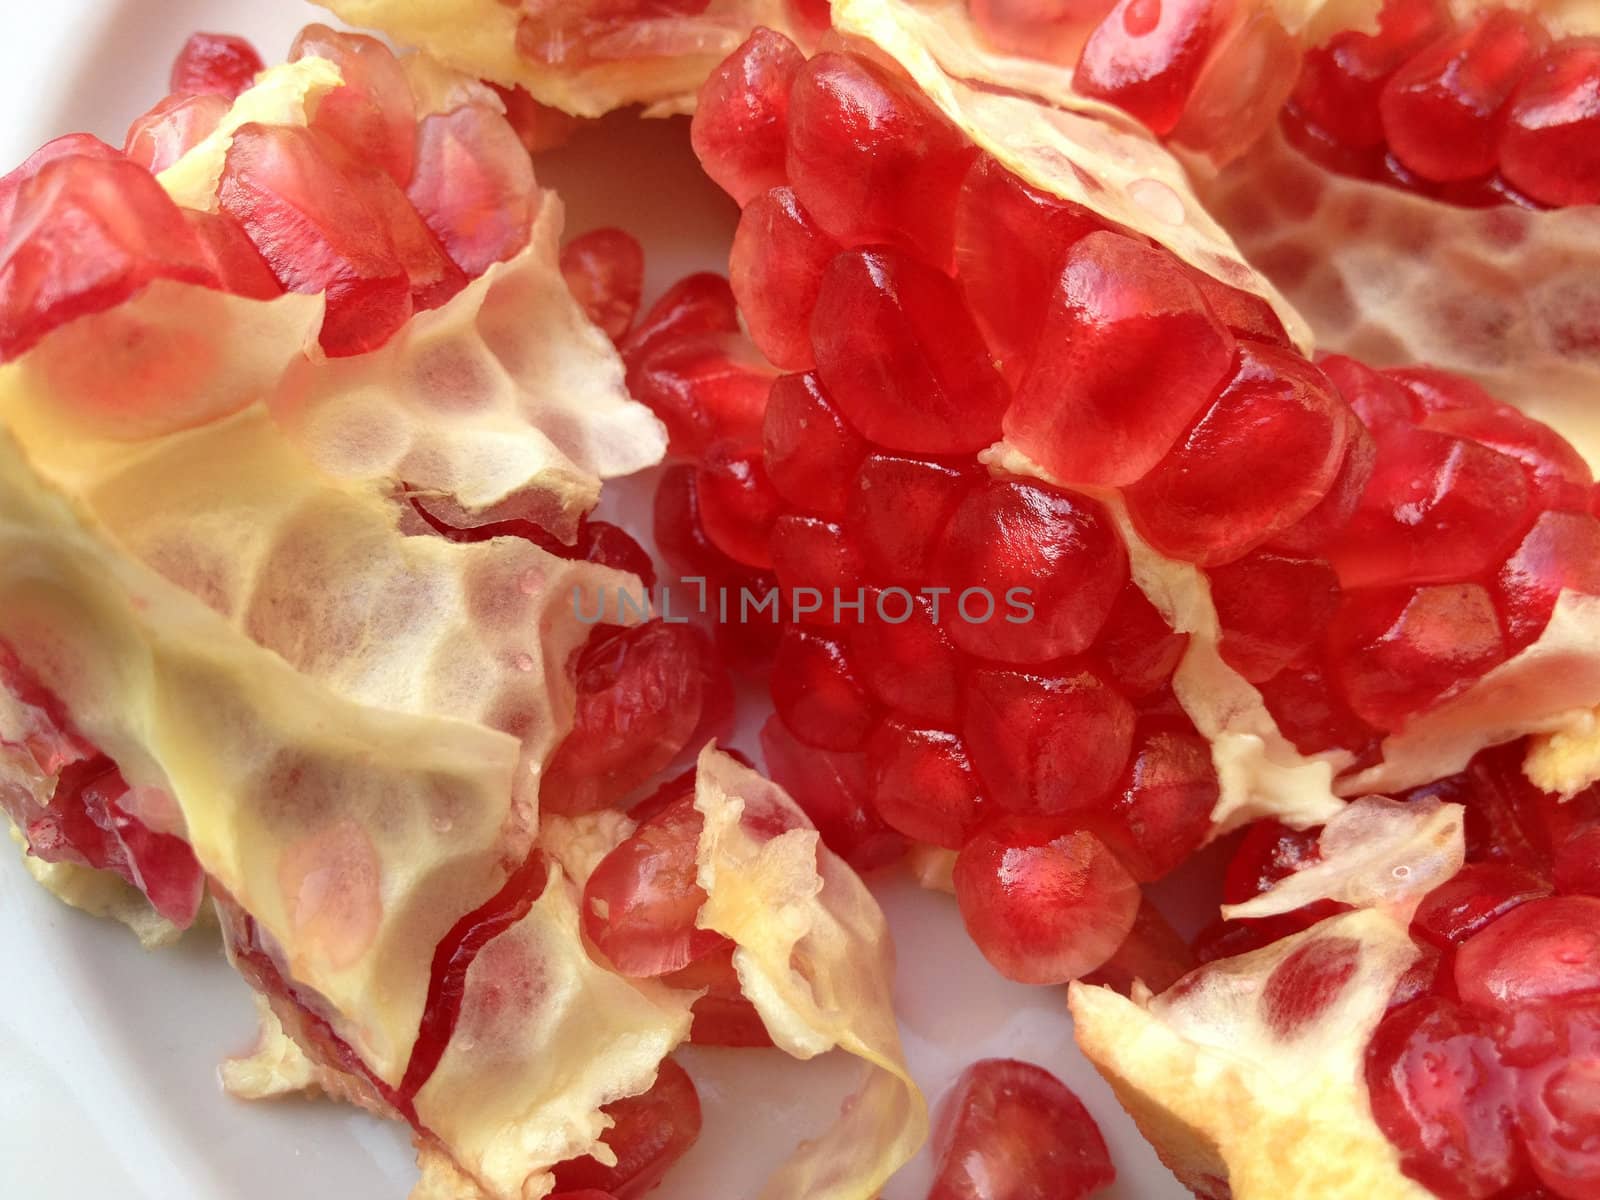 pomegranate open show her fresh seeds